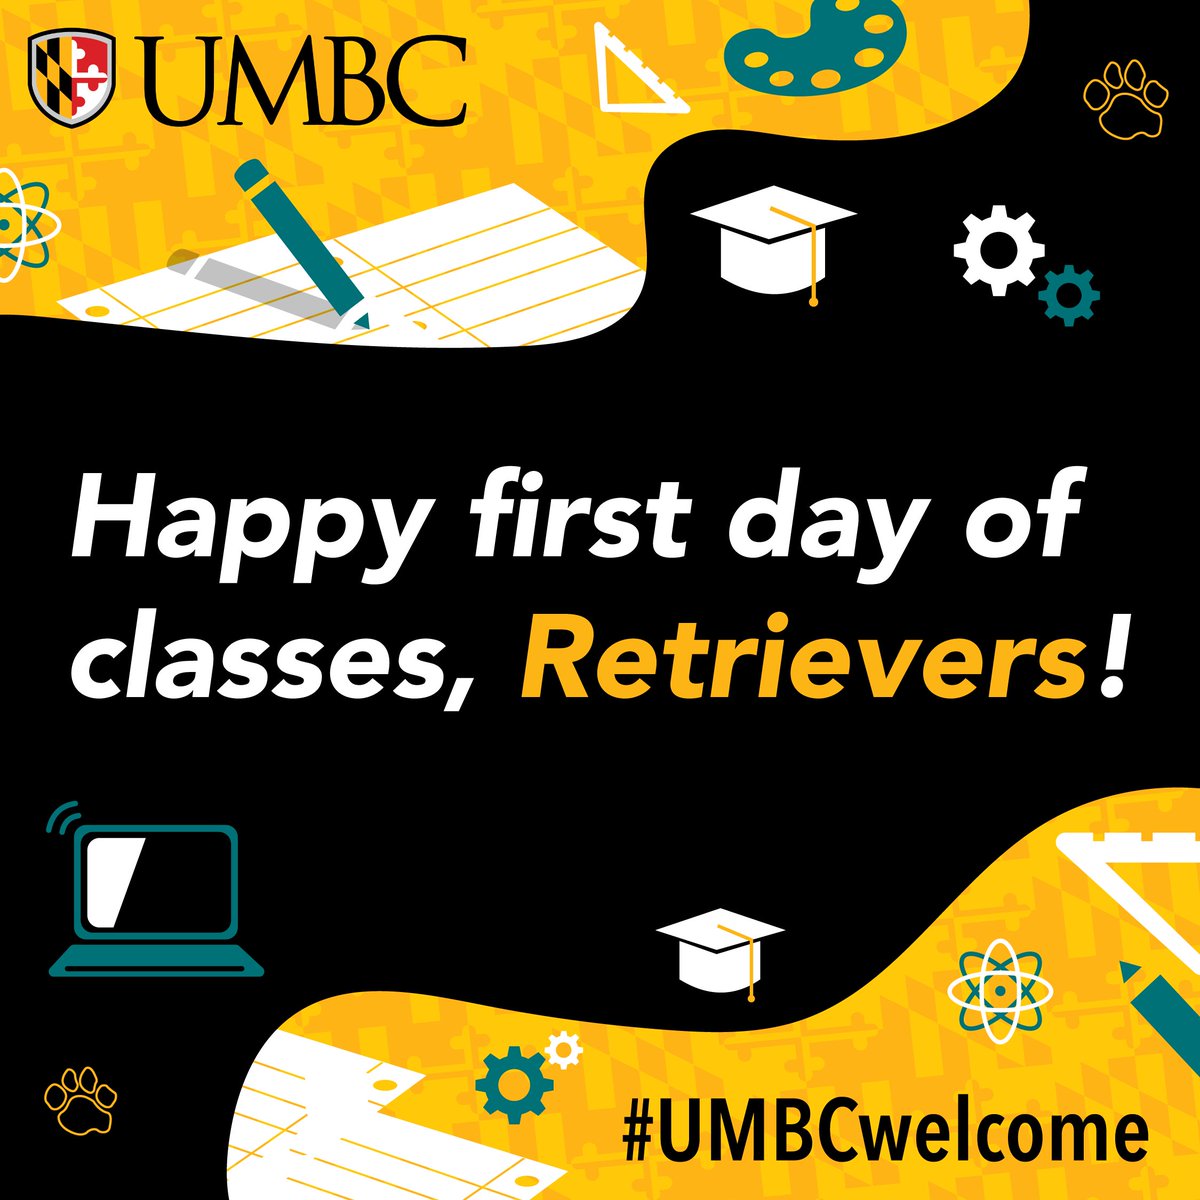 We're baaack! Happy first day of classes, Retrievers! Head over to our virtual photo booth to take your first day of school photos (no laser background, sorry to disappoint) and share on social media using #UMBCwelcome. bit.ly/3yV0j5S